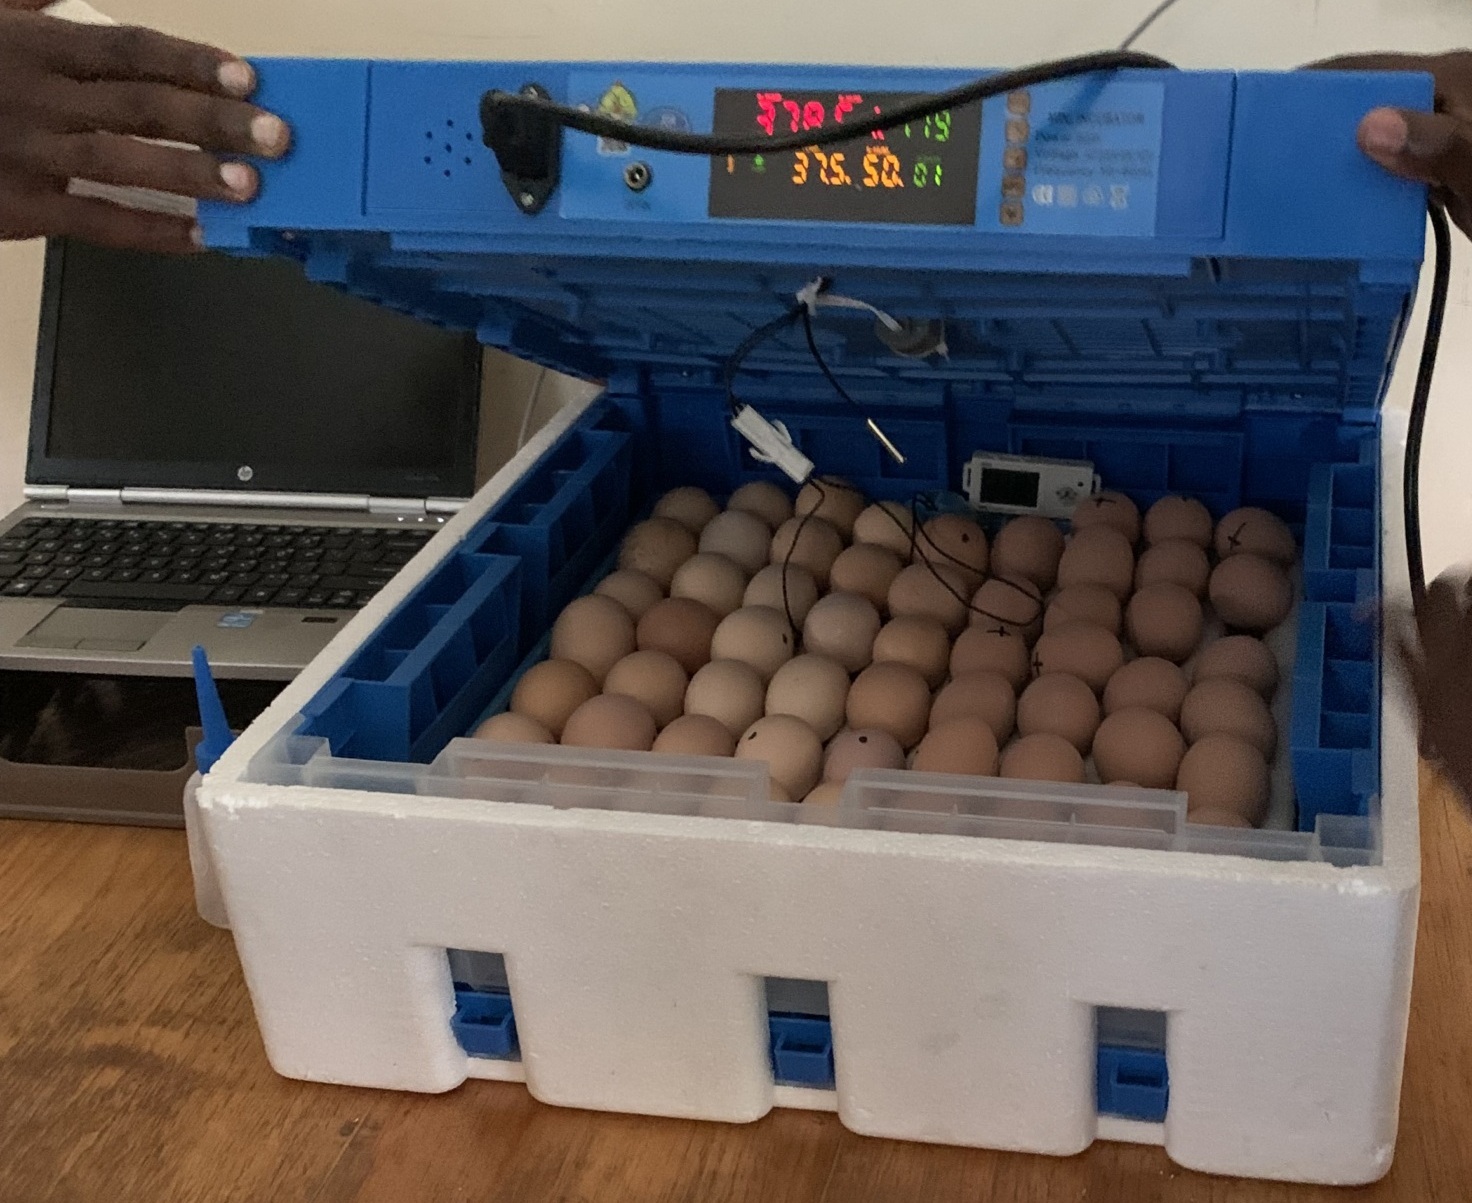 An egg incubator shaped like a box. Inside are around 80 eggs. Two hands are lifting up the lid.